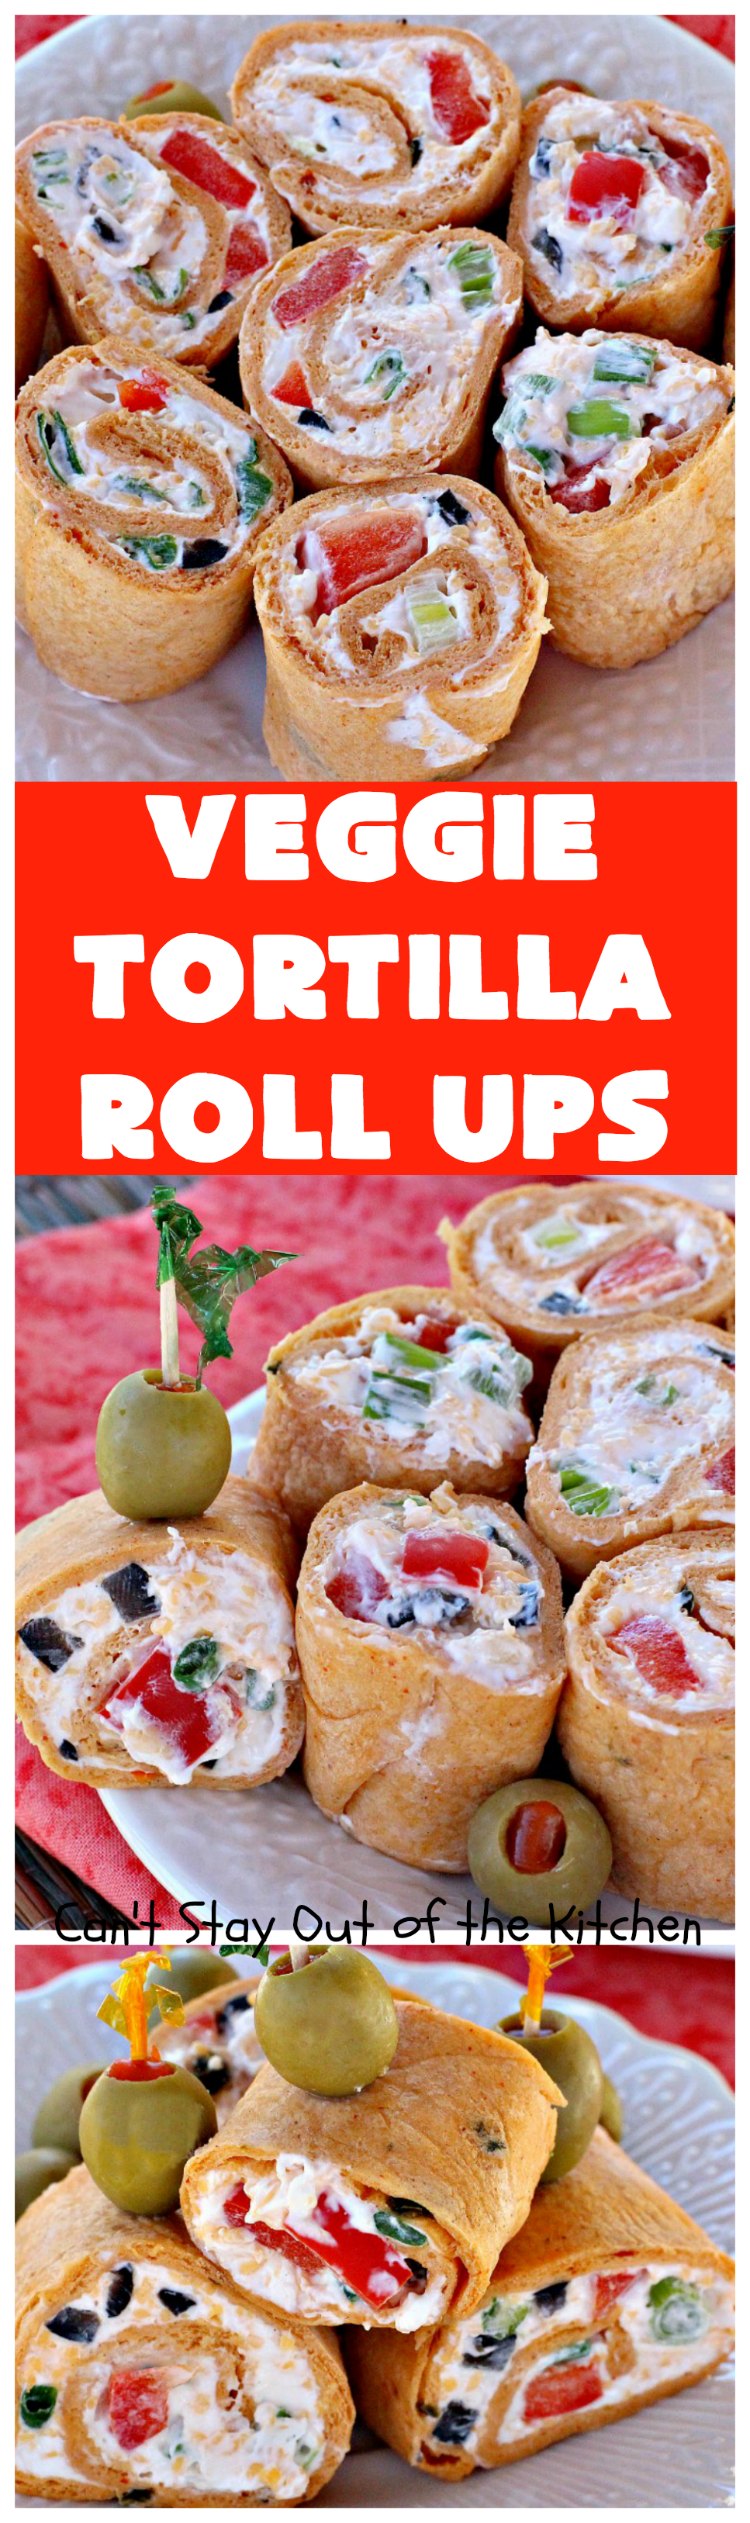 Veggie Tortilla Roll Ups | Can't Stay Out of the Kitchen